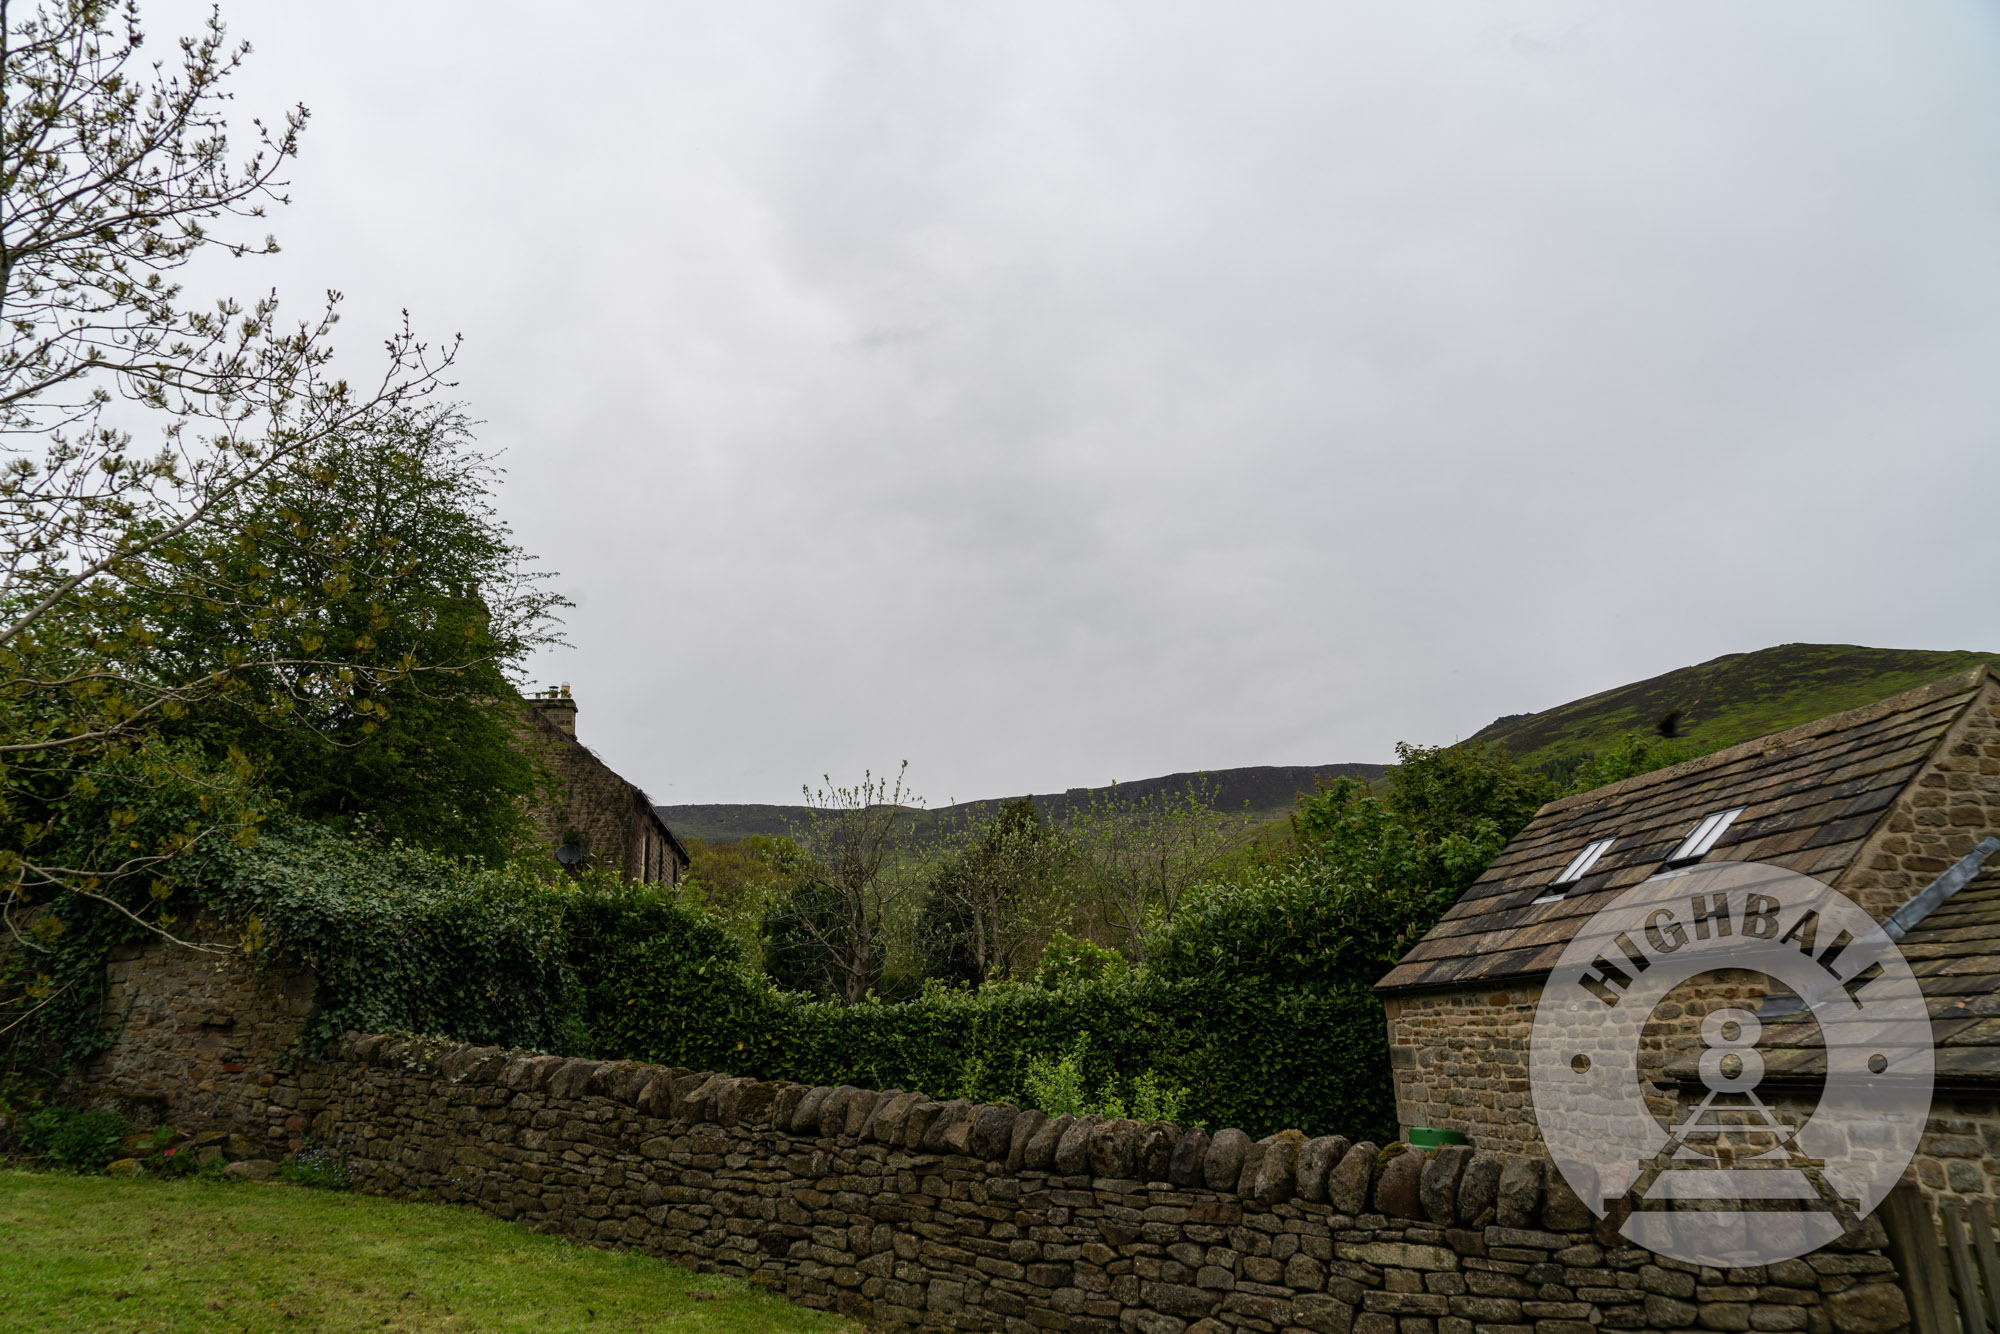 Scenery at Edale village and the start of the Pennine Way, Peak District, Derbyshire, England, UK, 2018.